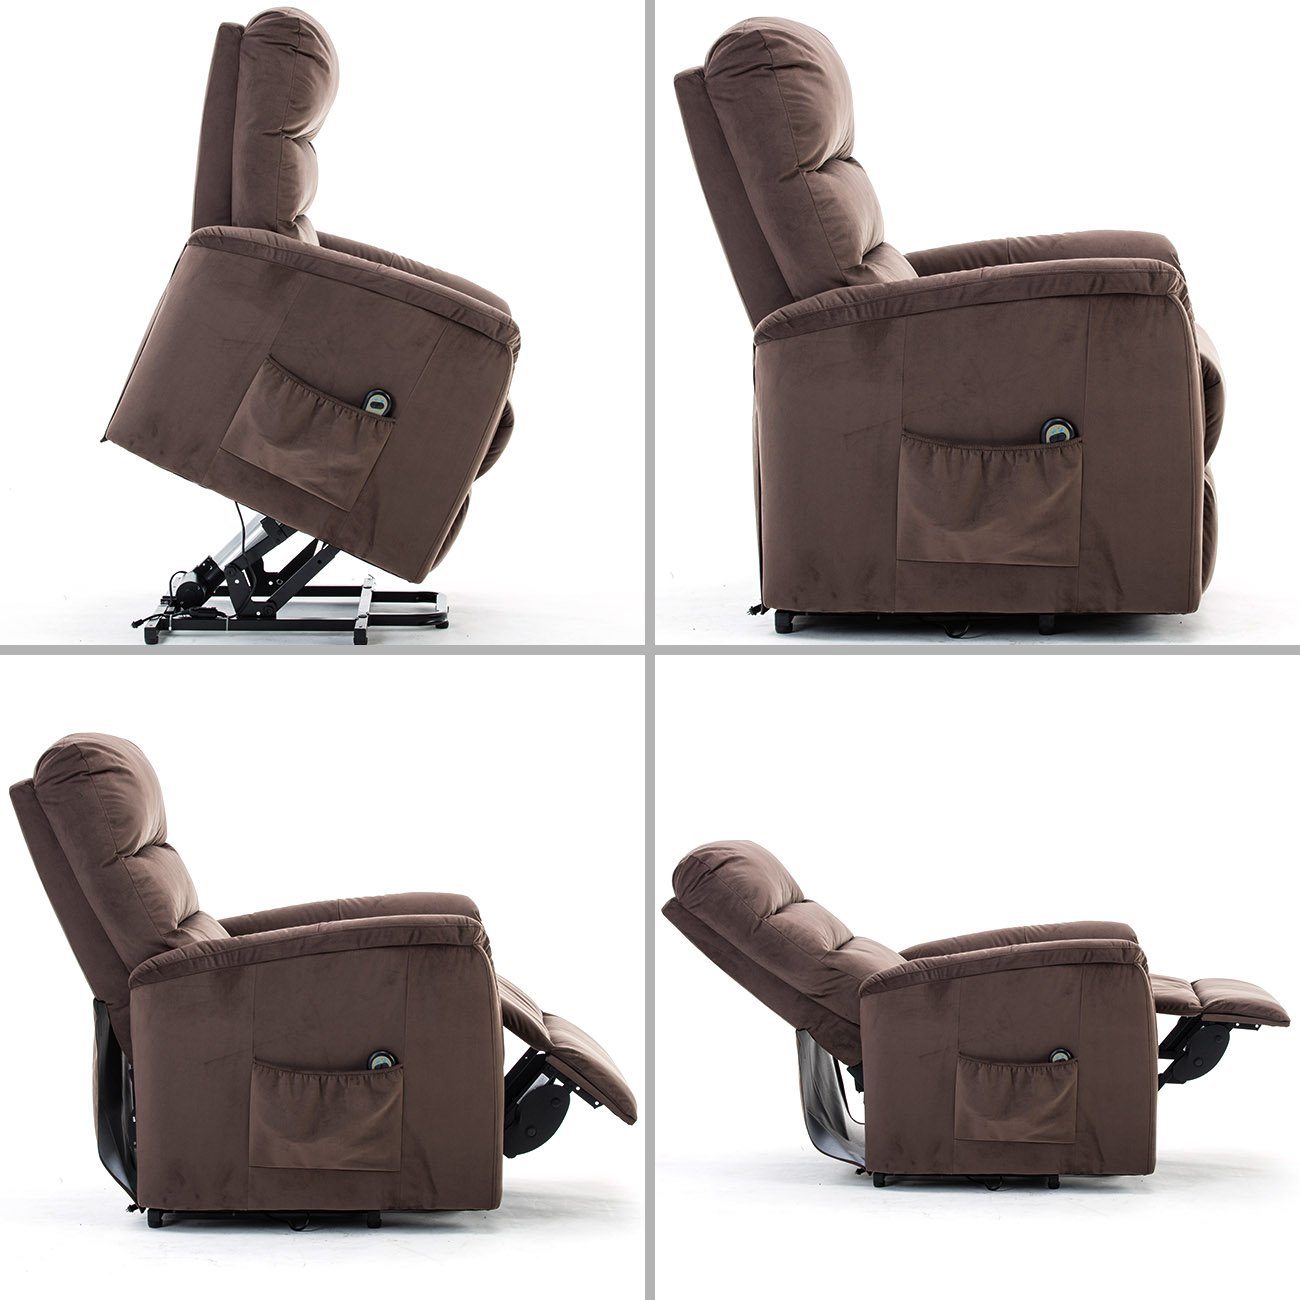 Elderly Rise Chair Remote Control Adjustable Electric Recliner